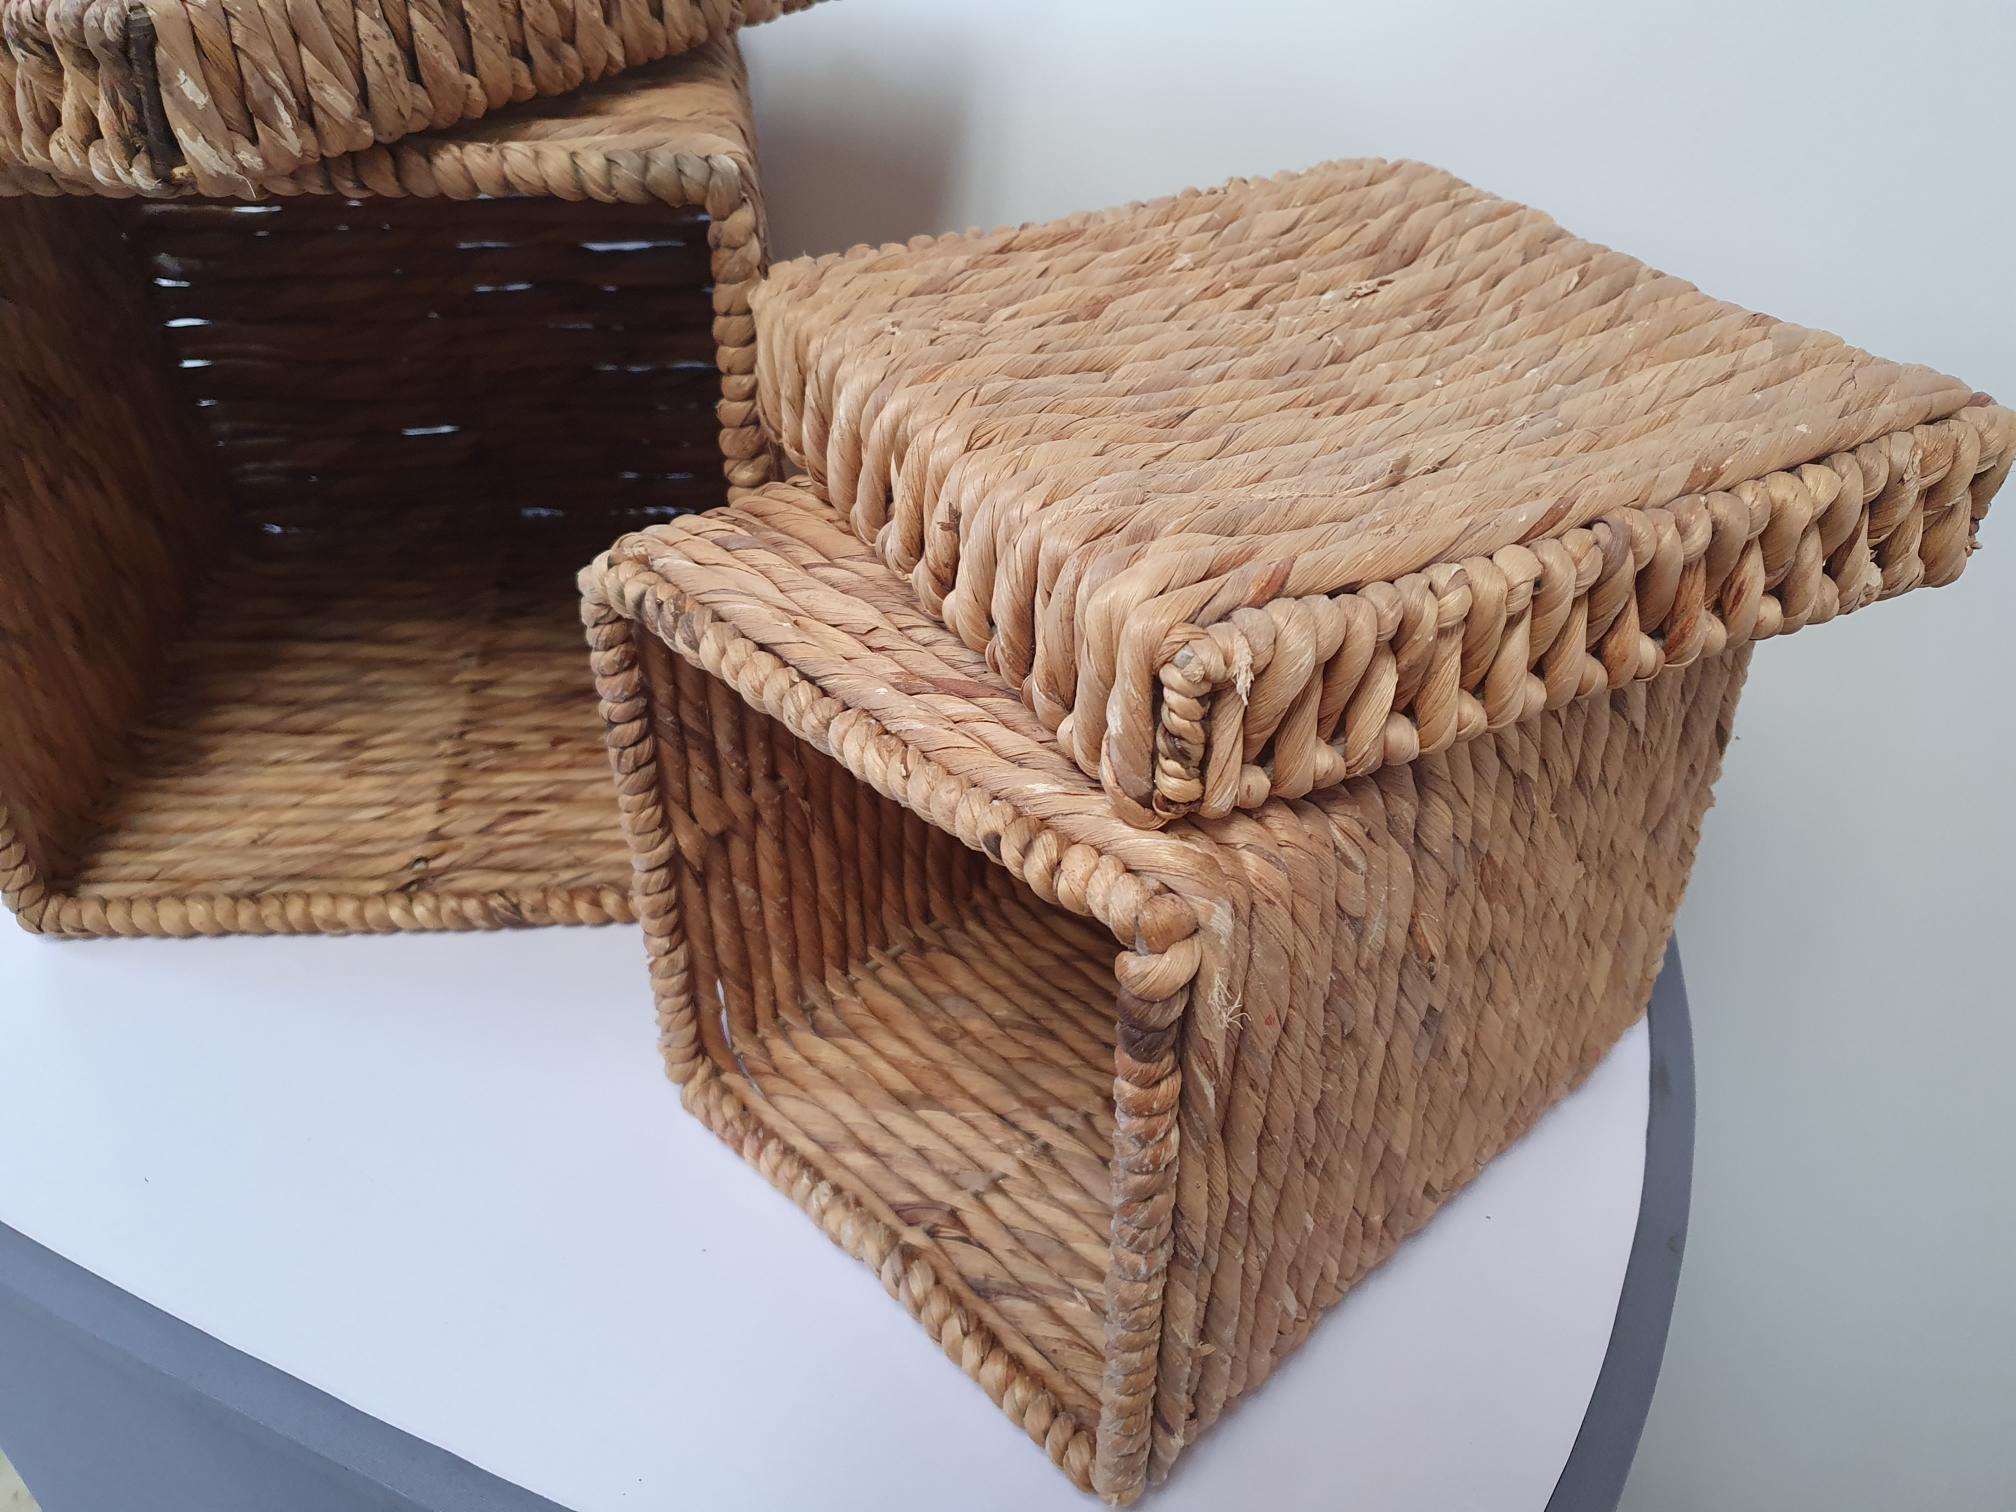 Wicker Pair Baskets - Image 6 of 6